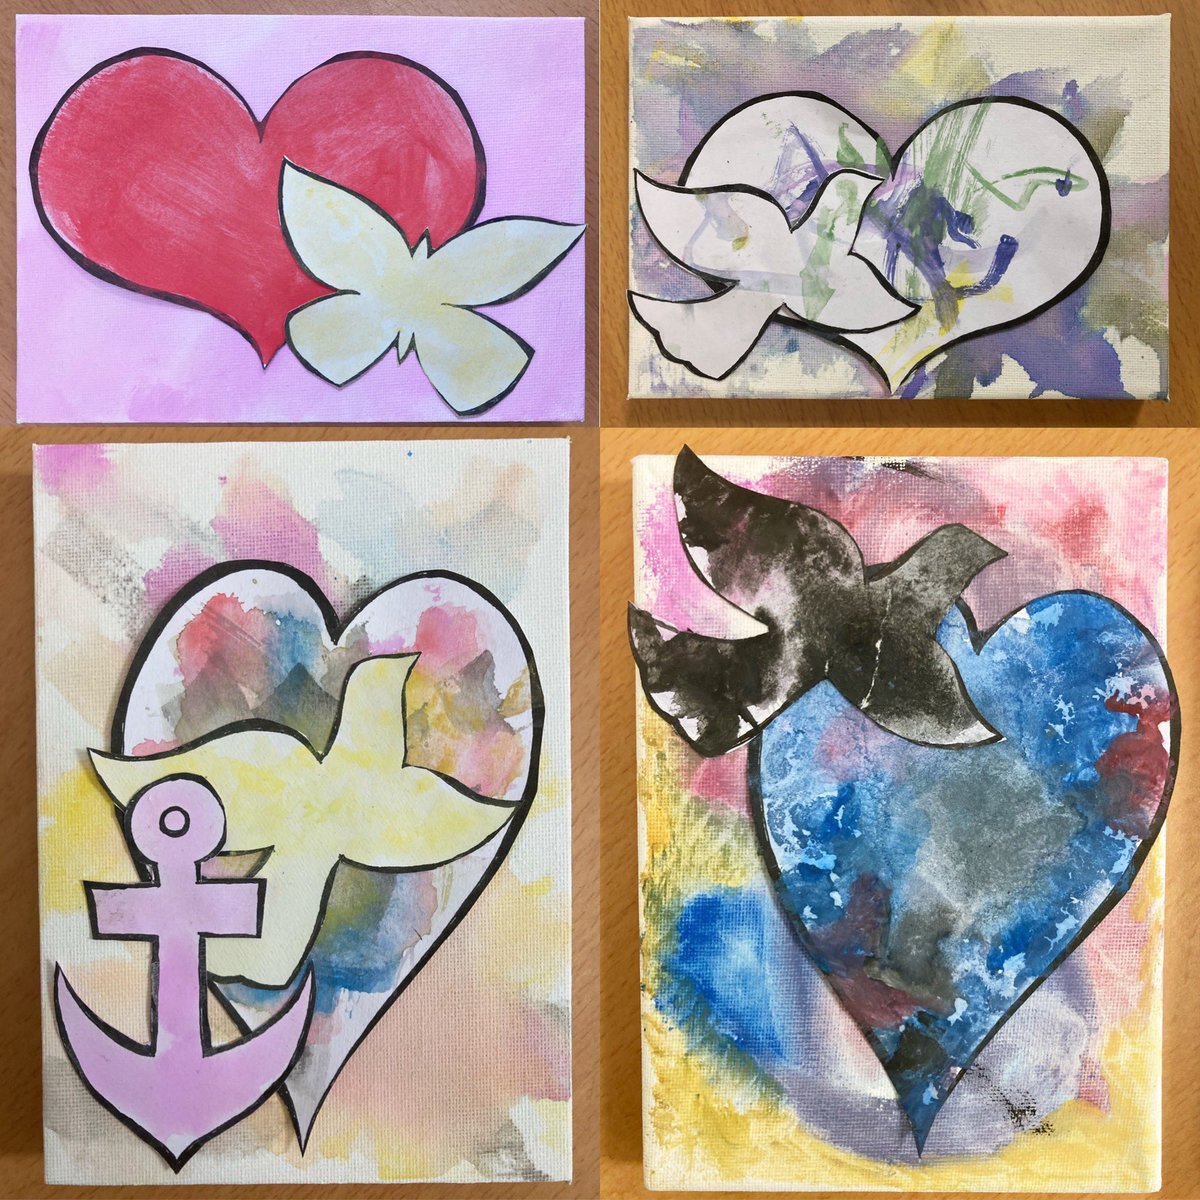 At #TotArt today in #Anfield, we created on with (symbols of) hope in our hearts. You’ll Never Art Alone at #LiverpoolLighthouse. #AliHarwood #artist #Liverpool